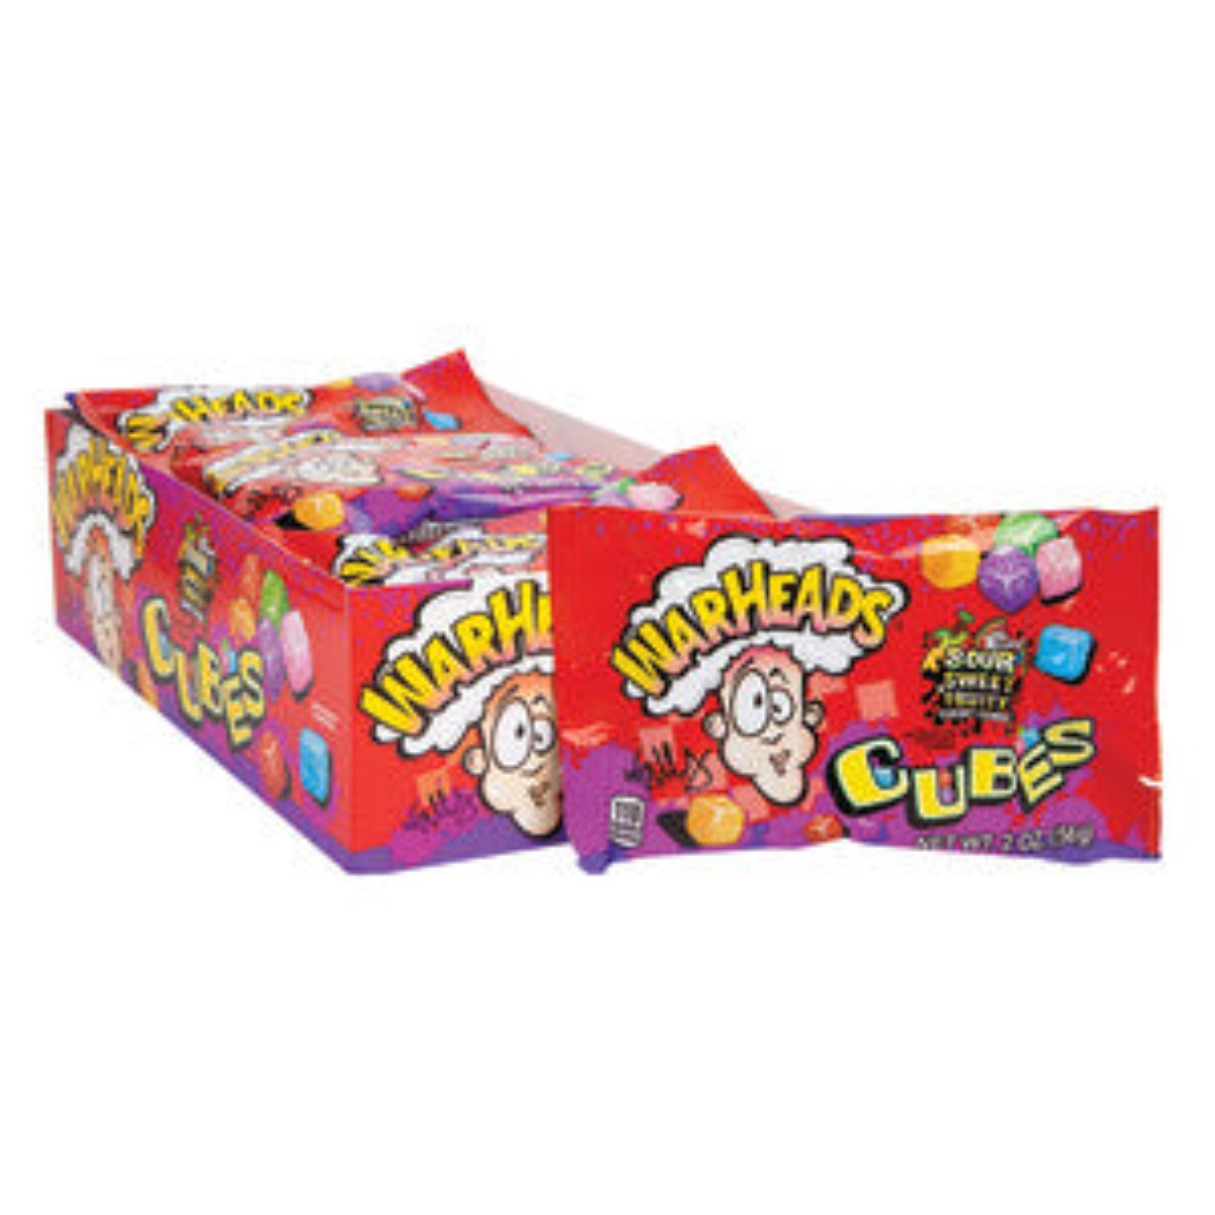 Warheads Sour Chewy Cubes Bag 2oz - 15ct